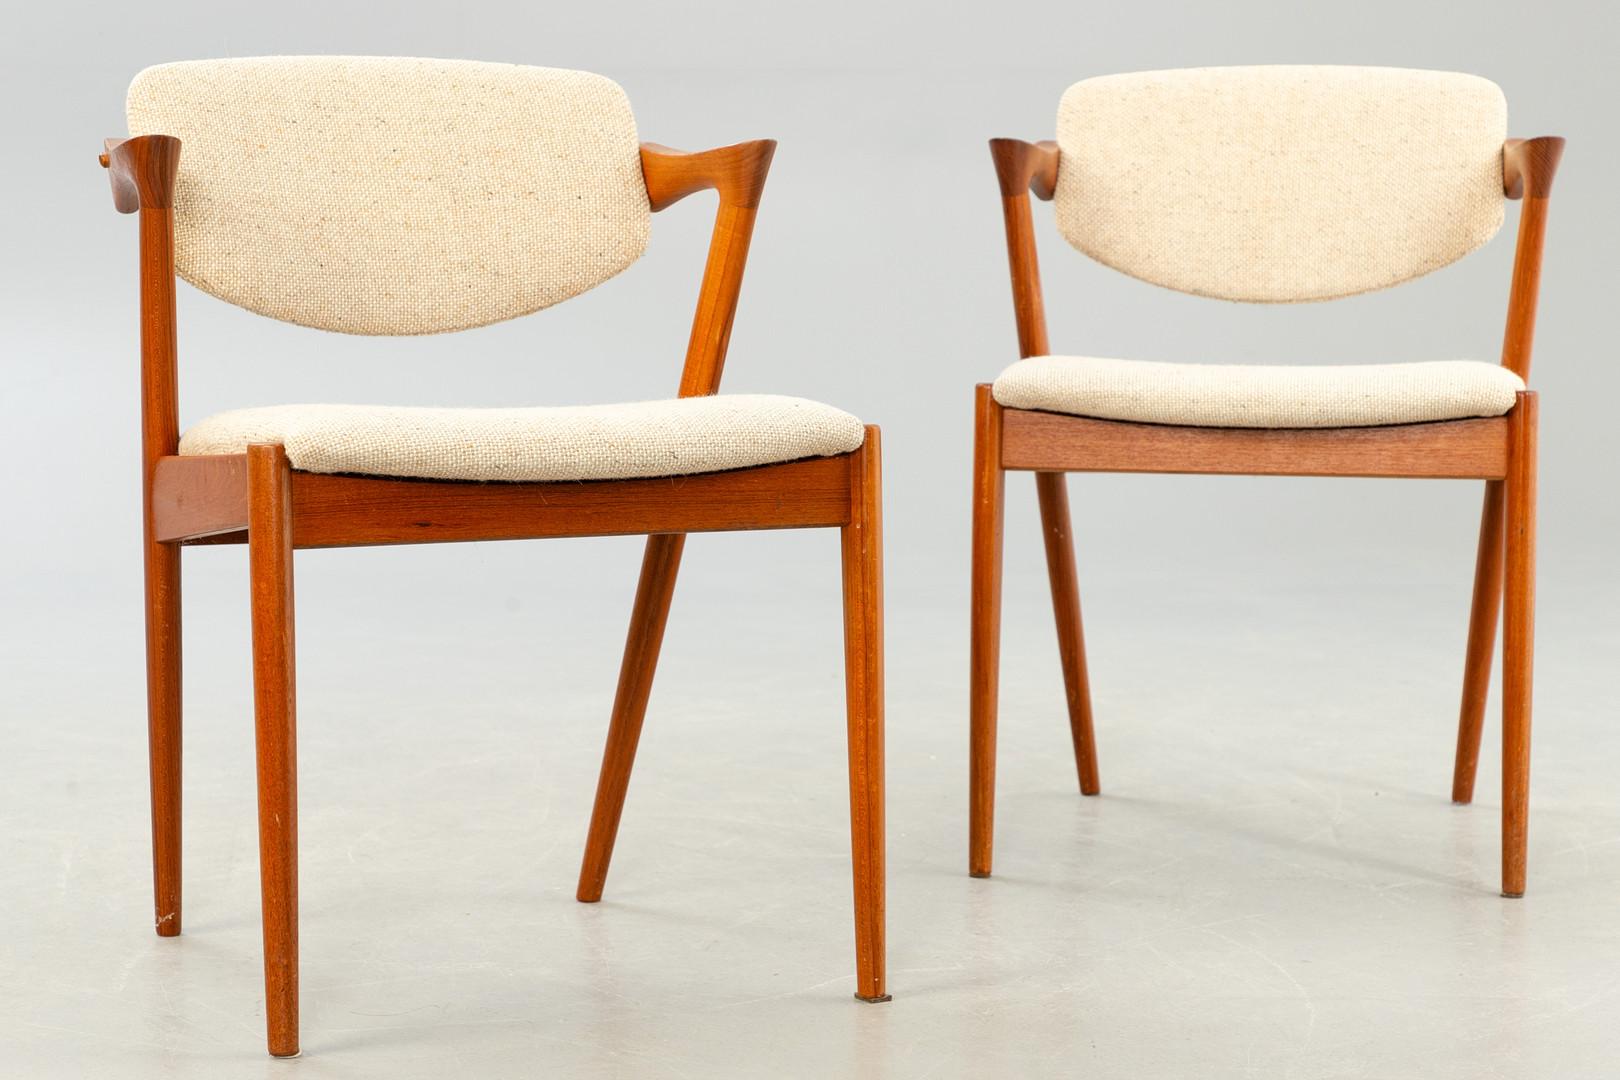 Dining chairs, model 42, designed by Kai Kristiansen and manufactured in Denmark by Schou Andersen Møbelfabrik. The chairs are made from solid teak, featuring tapered legs, curved armrests and wool upholstery. Good vintage condition. Price per